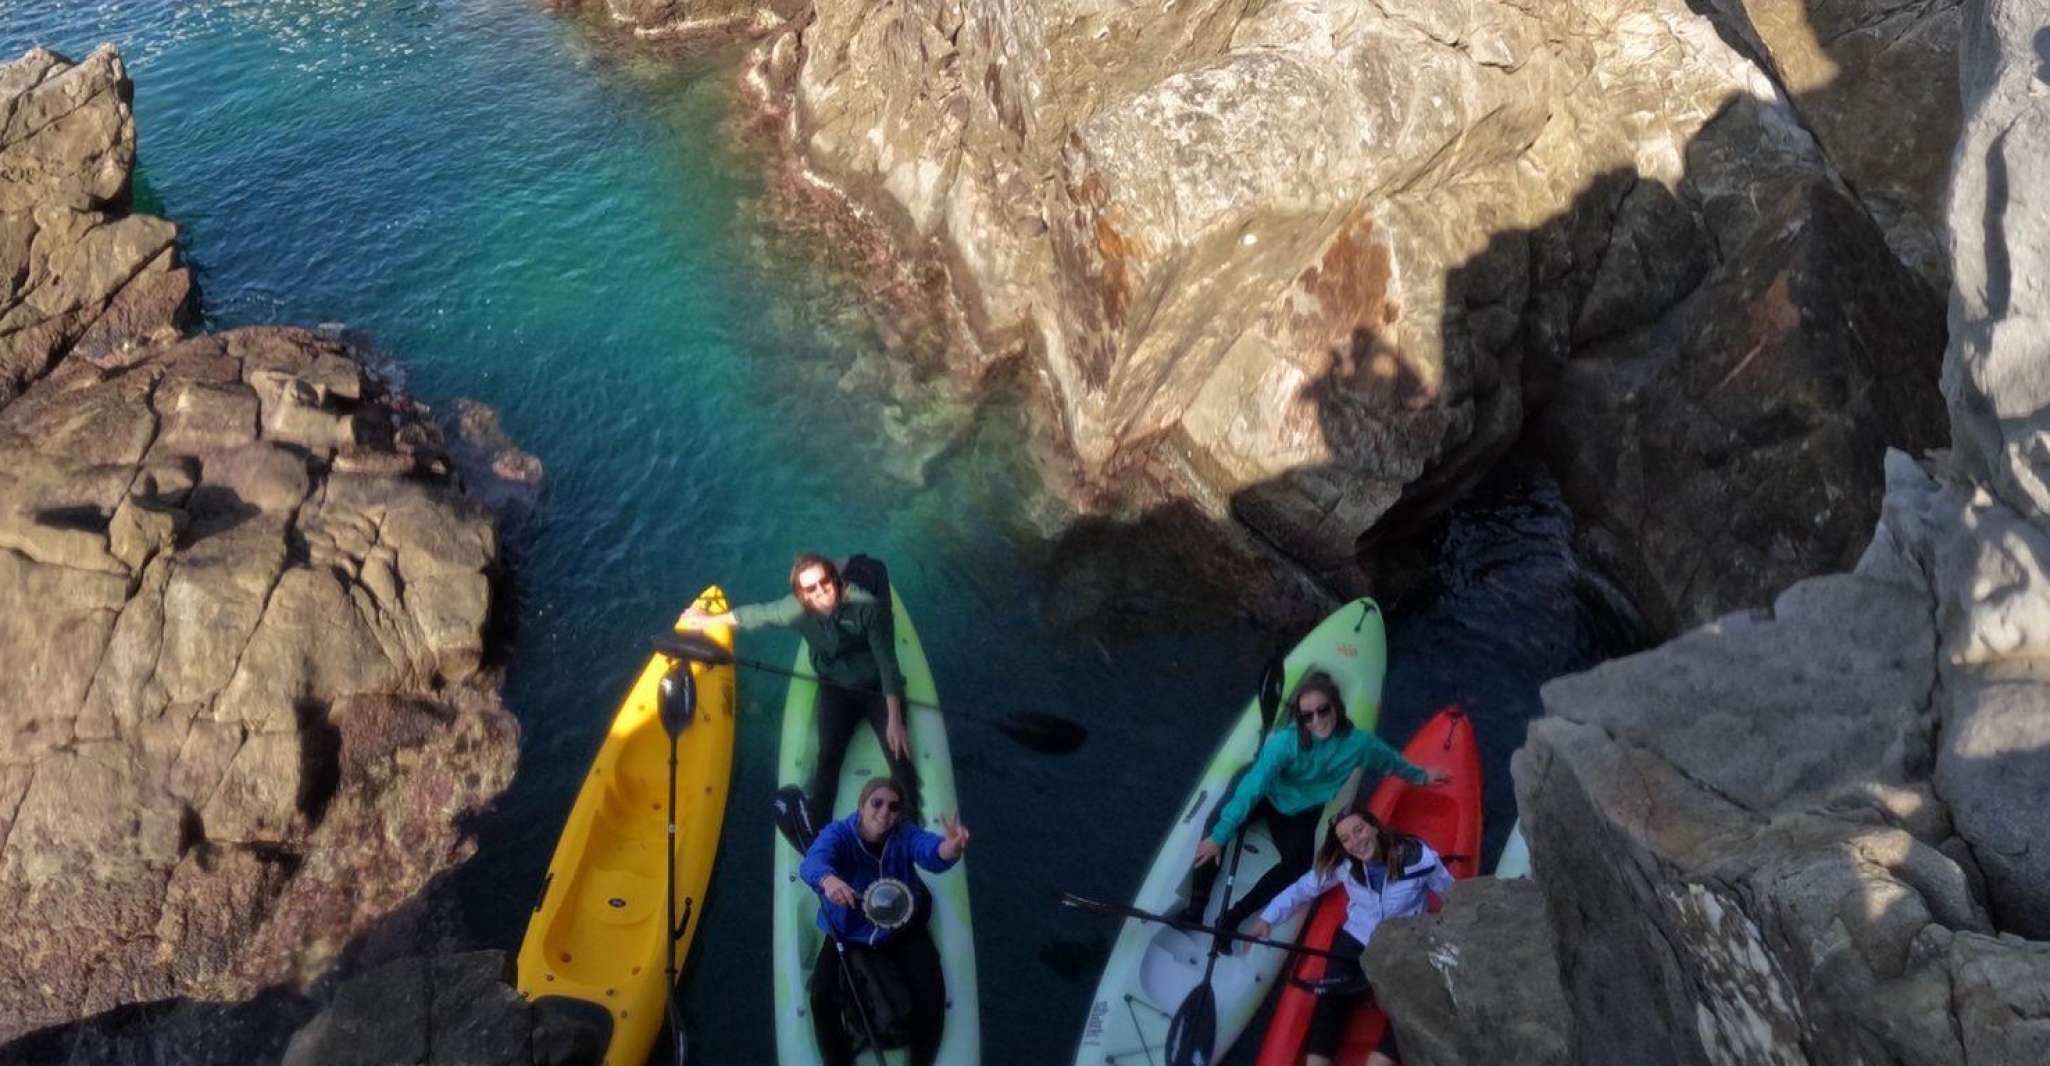 Kayak Tour in Levanto, Exploration and Nature - Housity